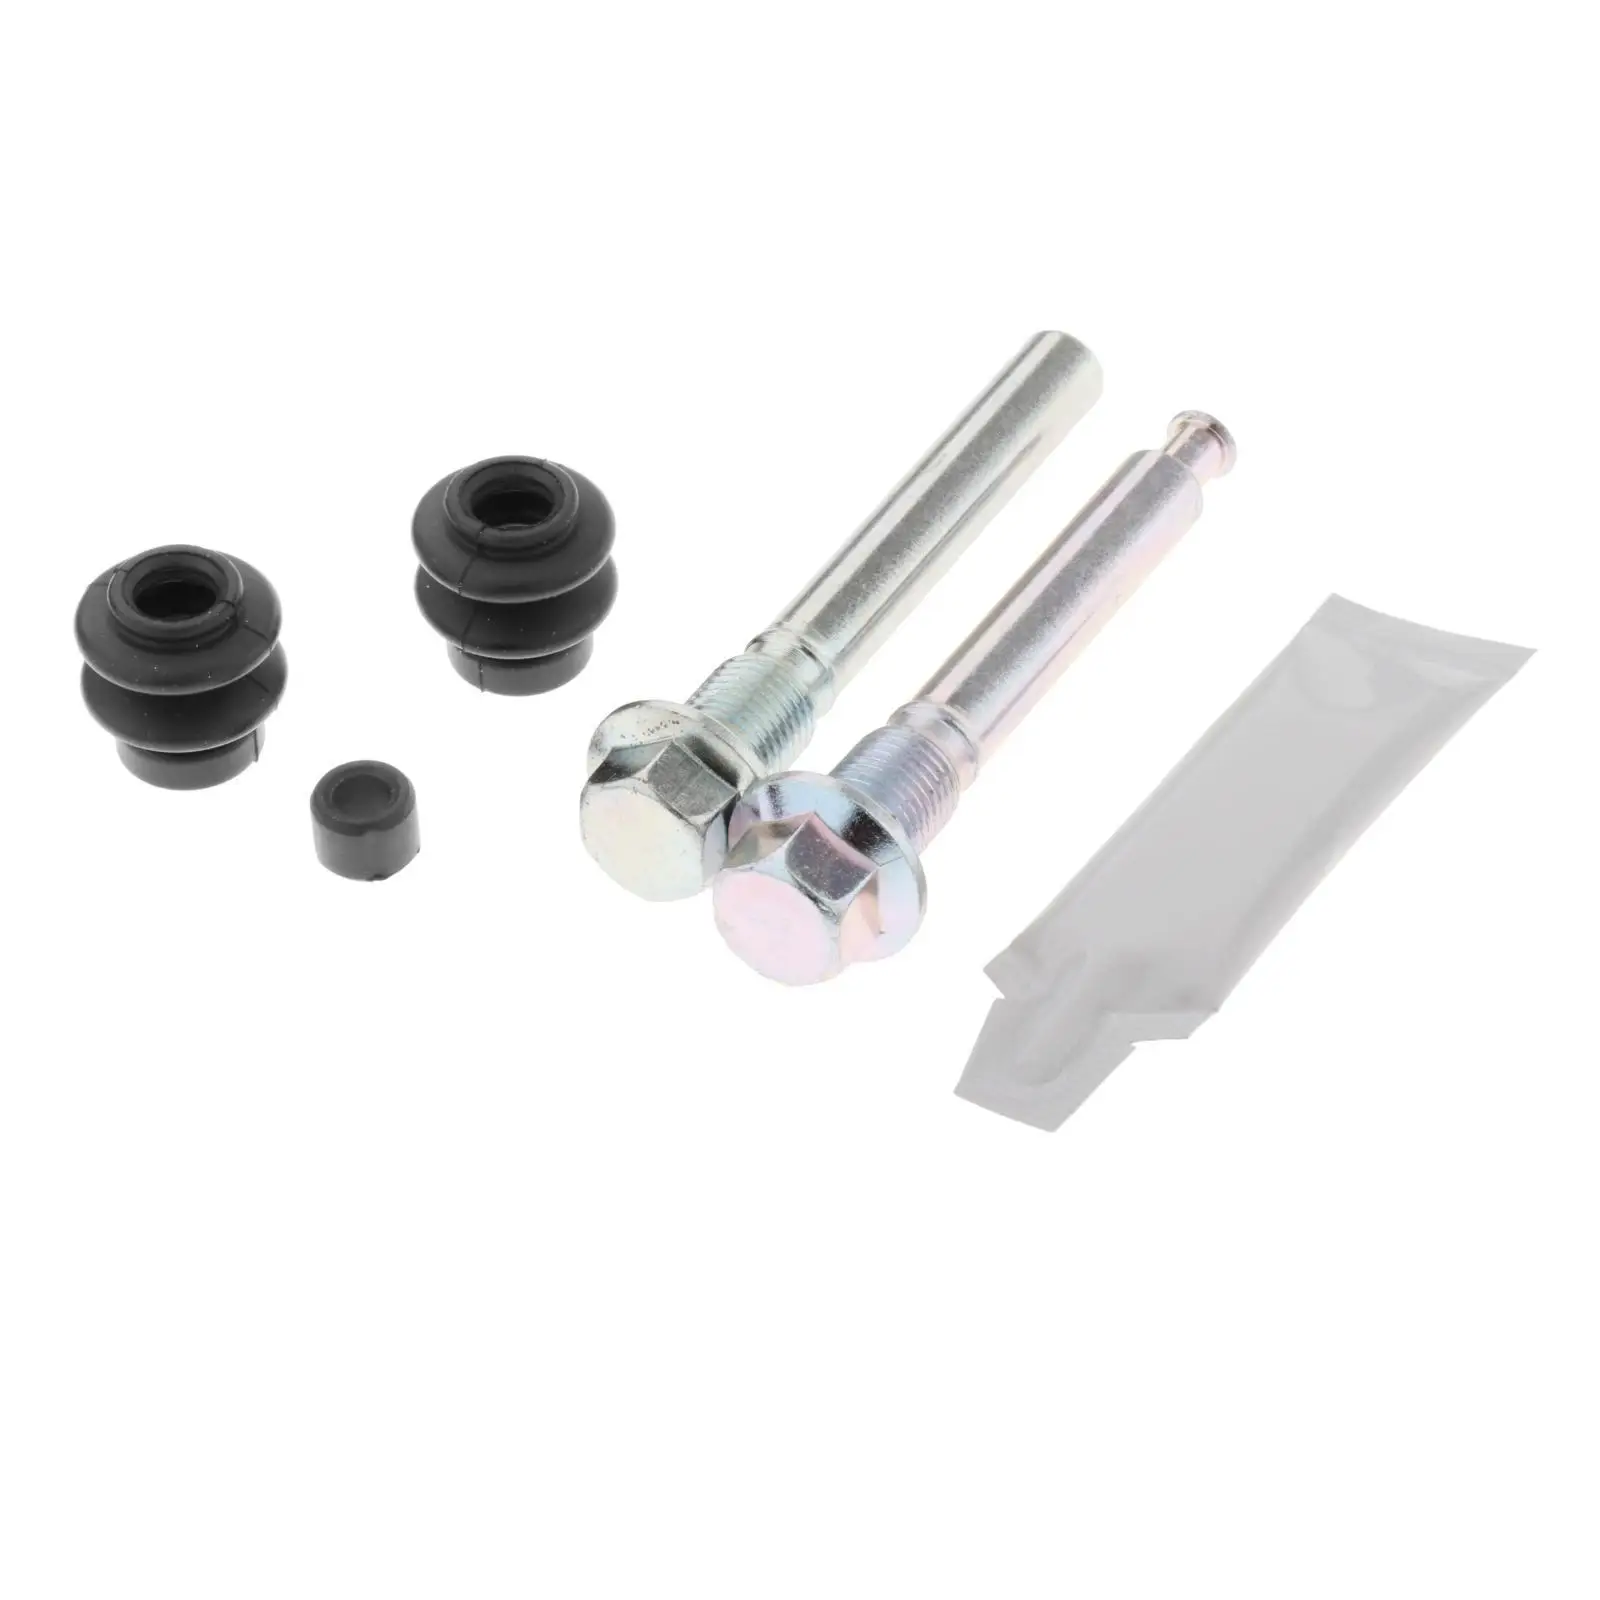 Rear Brake caliper Slider Pins Guide  Kit Bcf1402A  Kit  02-12 GG Gy GH Made of high reliable quality and durable material